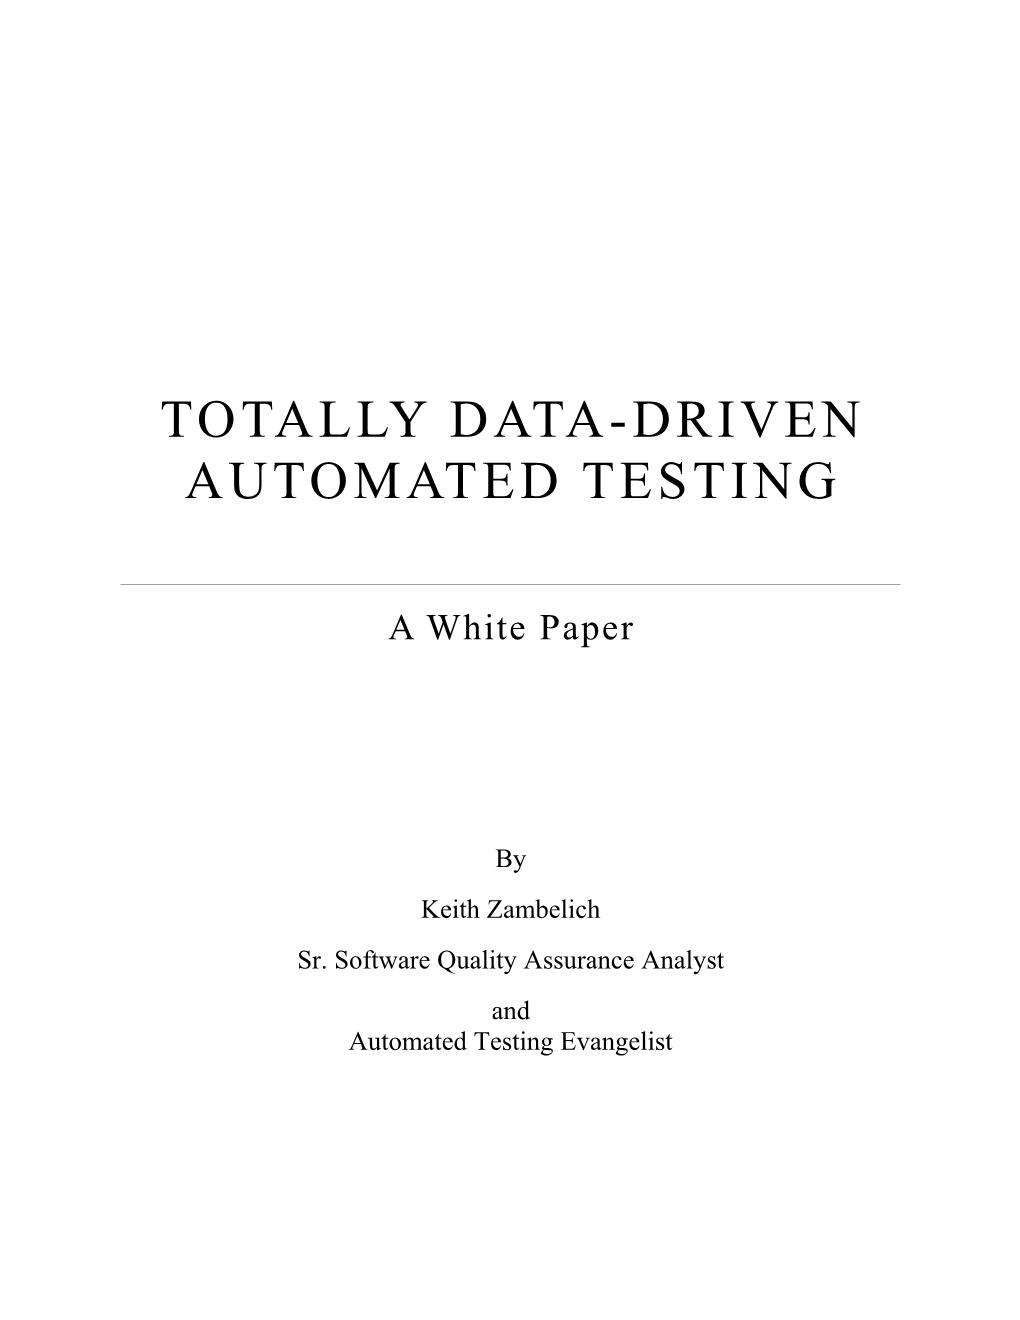 Totally Data-Driven Automated Testing